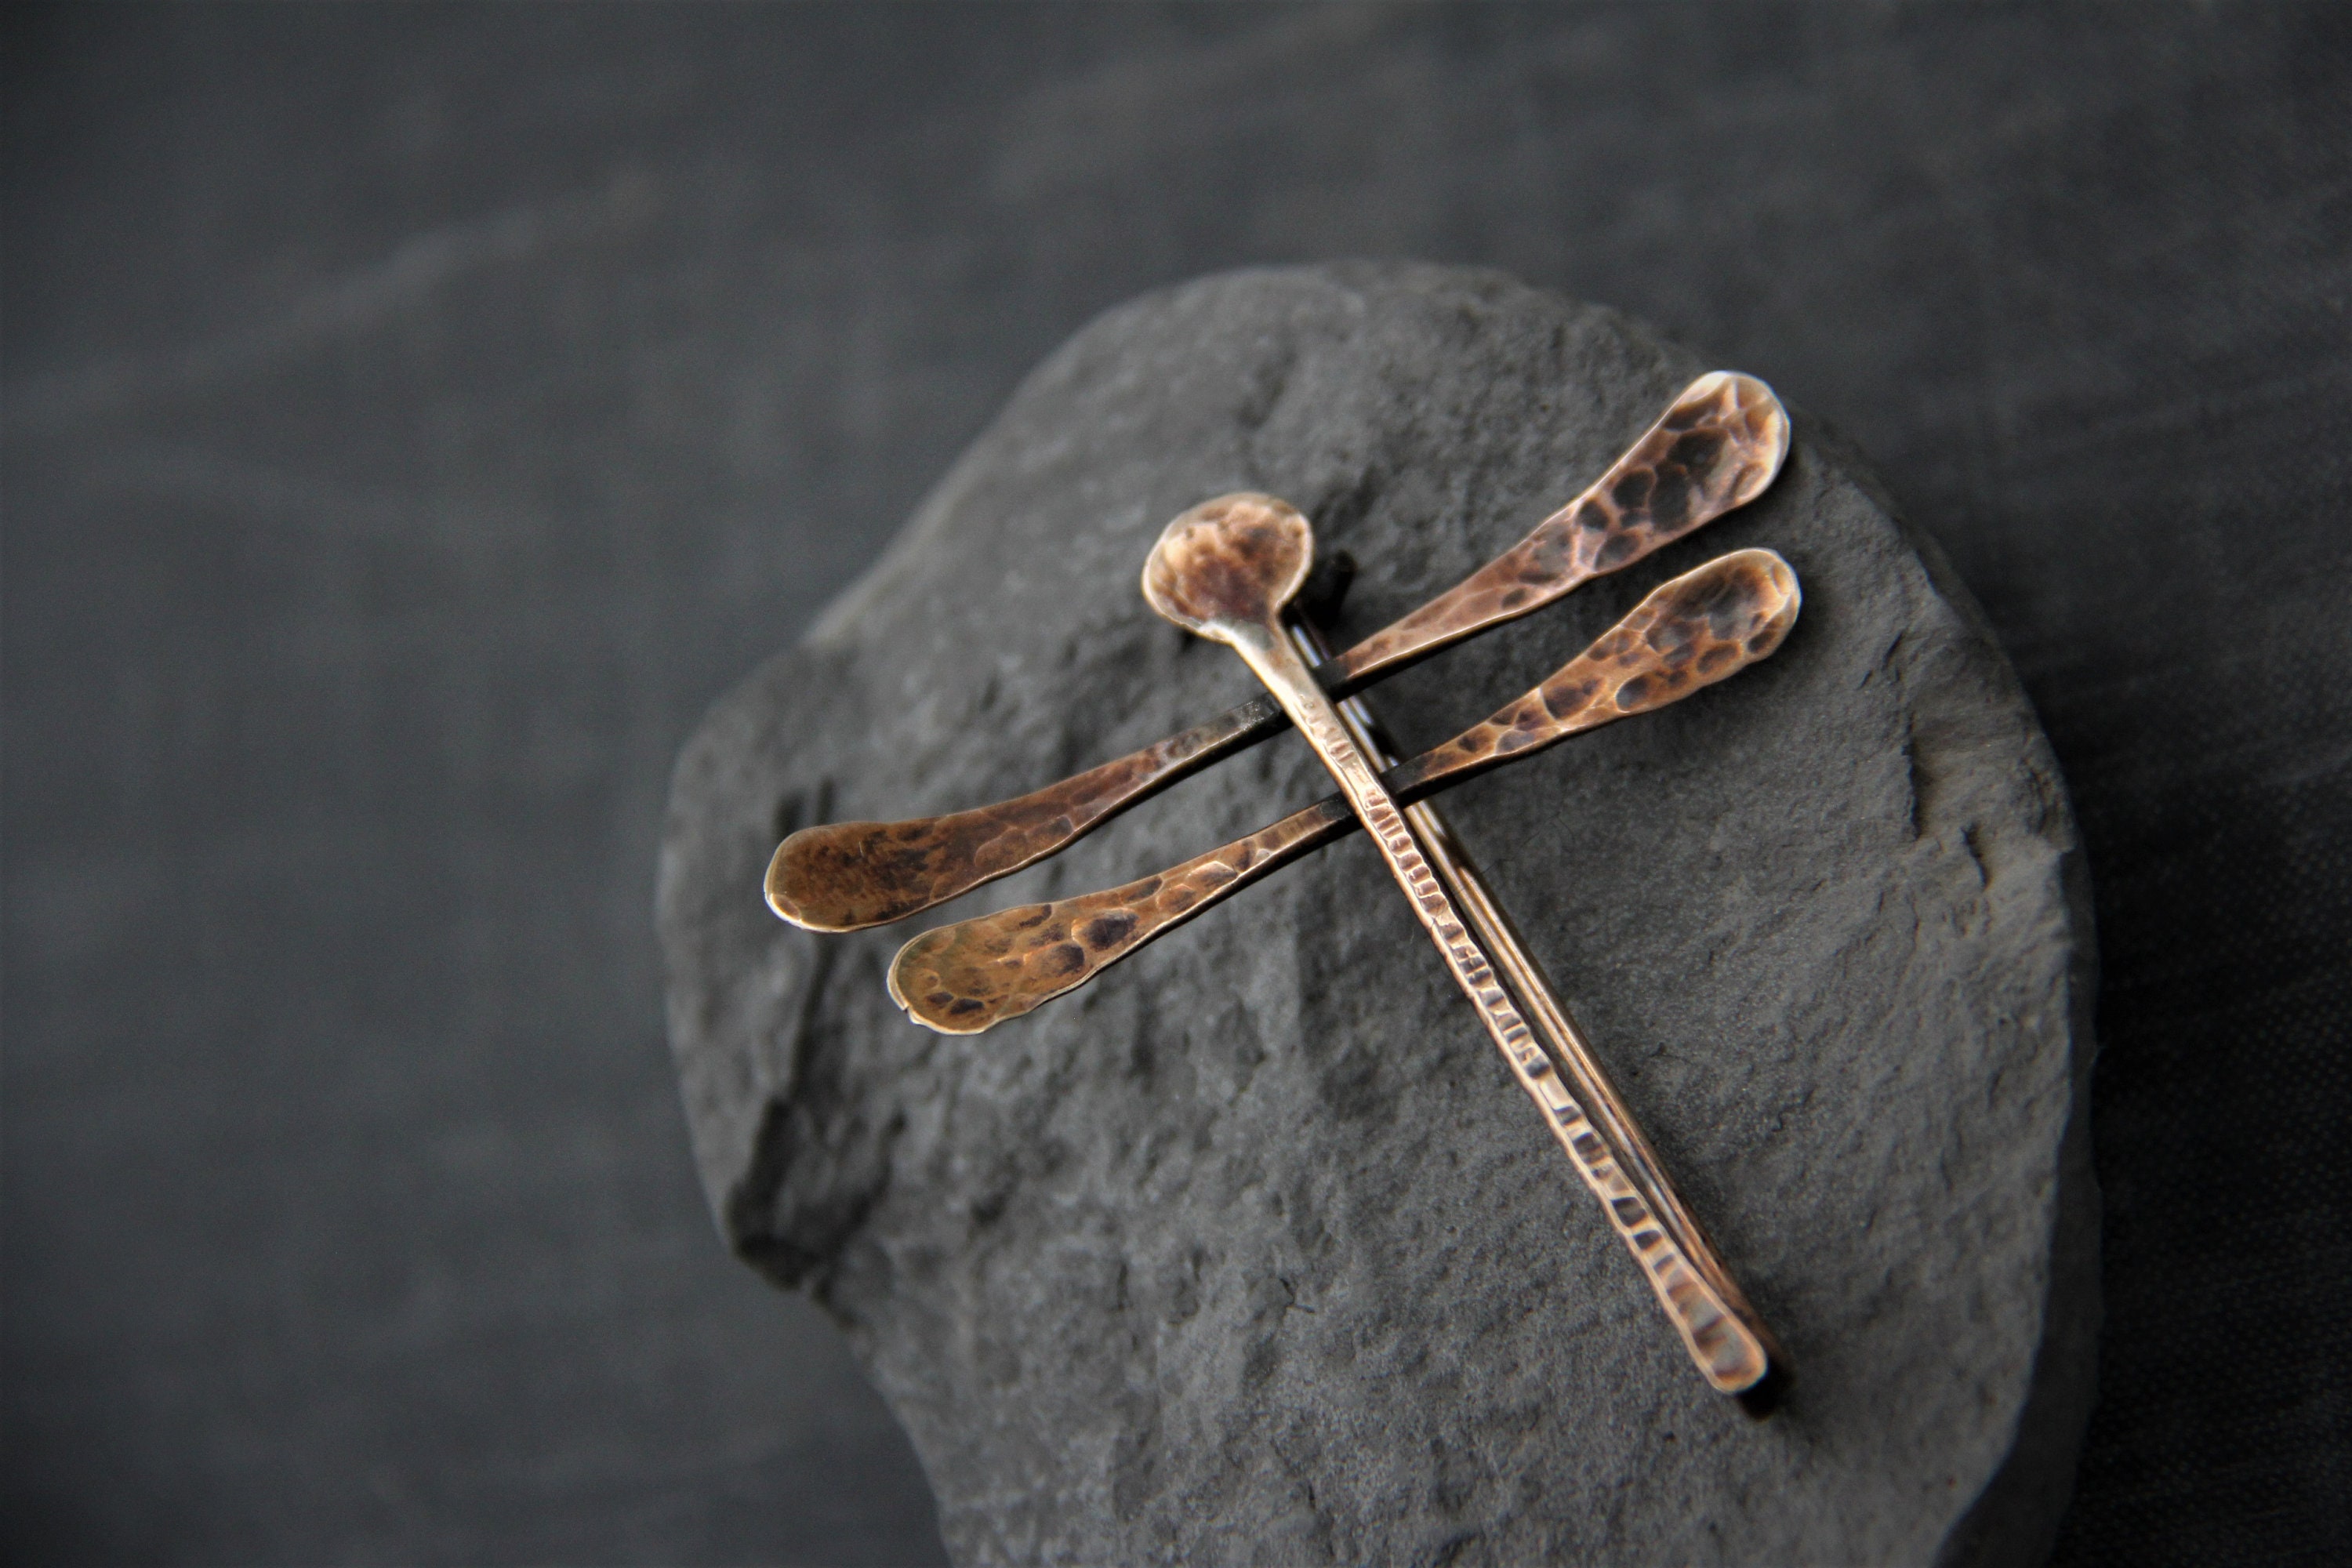 Keepandcherish Bronze Dragonfly Shawl Pin, Scarf Pin, Brooch, Fibula, Hammered, Textured. Rustic, Insects, Woodland, Nature Lover, Artisan Jewelry